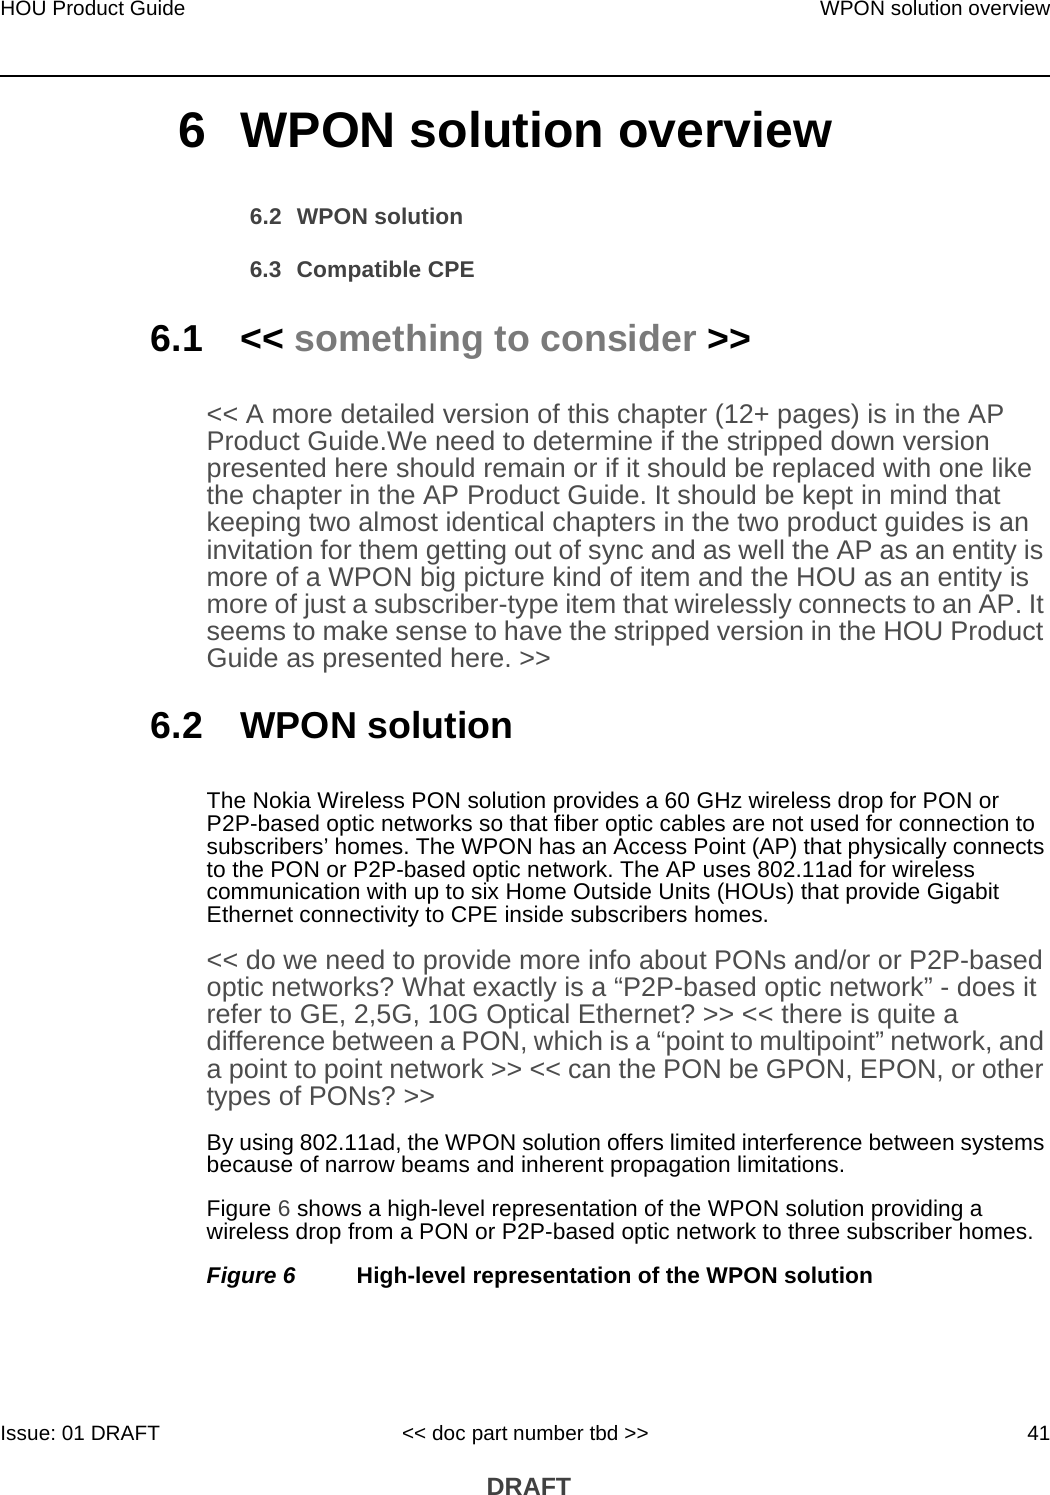 HOU Product Guide WPON solution overviewIssue: 01 DRAFT &lt;&lt; doc part number tbd &gt;&gt; 41 DRAFT6 WPON solution overview6.2 WPON solution6.3 Compatible CPE6.1 &lt;&lt; something to consider &gt;&gt;&lt;&lt; A more detailed version of this chapter (12+ pages) is in the AP Product Guide.We need to determine if the stripped down version presented here should remain or if it should be replaced with one like the chapter in the AP Product Guide. It should be kept in mind that keeping two almost identical chapters in the two product guides is an invitation for them getting out of sync and as well the AP as an entity is more of a WPON big picture kind of item and the HOU as an entity is more of just a subscriber-type item that wirelessly connects to an AP. It seems to make sense to have the stripped version in the HOU Product Guide as presented here. &gt;&gt;6.2 WPON solutionThe Nokia Wireless PON solution provides a 60 GHz wireless drop for PON or P2P-based optic networks so that fiber optic cables are not used for connection to subscribers’ homes. The WPON has an Access Point (AP) that physically connects to the PON or P2P-based optic network. The AP uses 802.11ad for wireless communication with up to six Home Outside Units (HOUs) that provide Gigabit Ethernet connectivity to CPE inside subscribers homes. &lt;&lt; do we need to provide more info about PONs and/or or P2P-based optic networks? What exactly is a “P2P-based optic network” - does it refer to GE, 2,5G, 10G Optical Ethernet? &gt;&gt; &lt;&lt; there is quite a difference between a PON, which is a “point to multipoint” network, and a point to point network &gt;&gt; &lt;&lt; can the PON be GPON, EPON, or other types of PONs? &gt;&gt;By using 802.11ad, the WPON solution offers limited interference between systems because of narrow beams and inherent propagation limitations.Figure 6 shows a high-level representation of the WPON solution providing a wireless drop from a PON or P2P-based optic network to three subscriber homes.Figure 6 High-level representation of the WPON solution